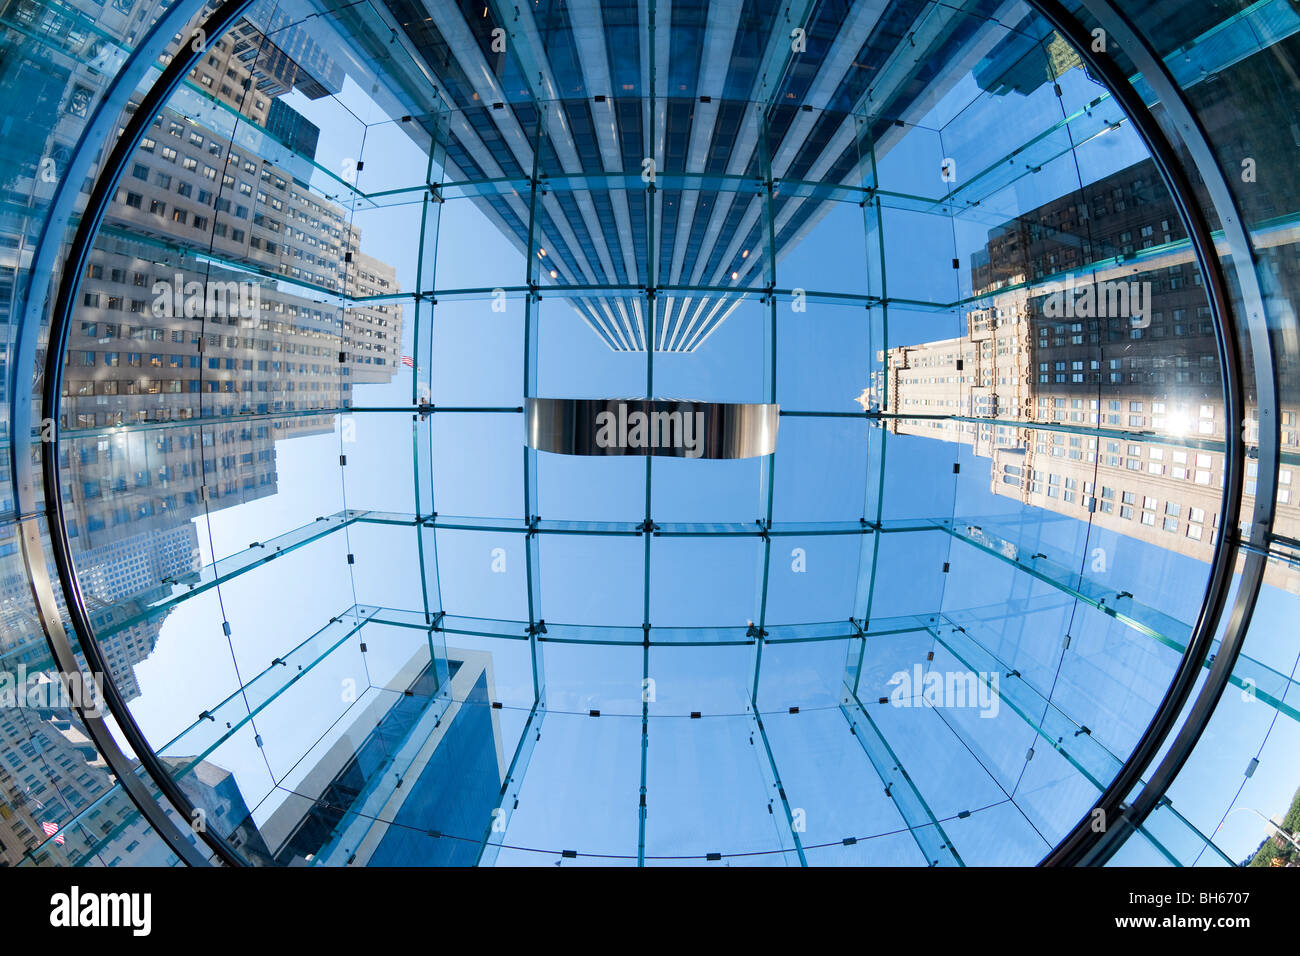 USA, New York City, Manhattan, skyscrapers of Fifth Avenue viewed from below through a glass roofed ceiling Stock Photo